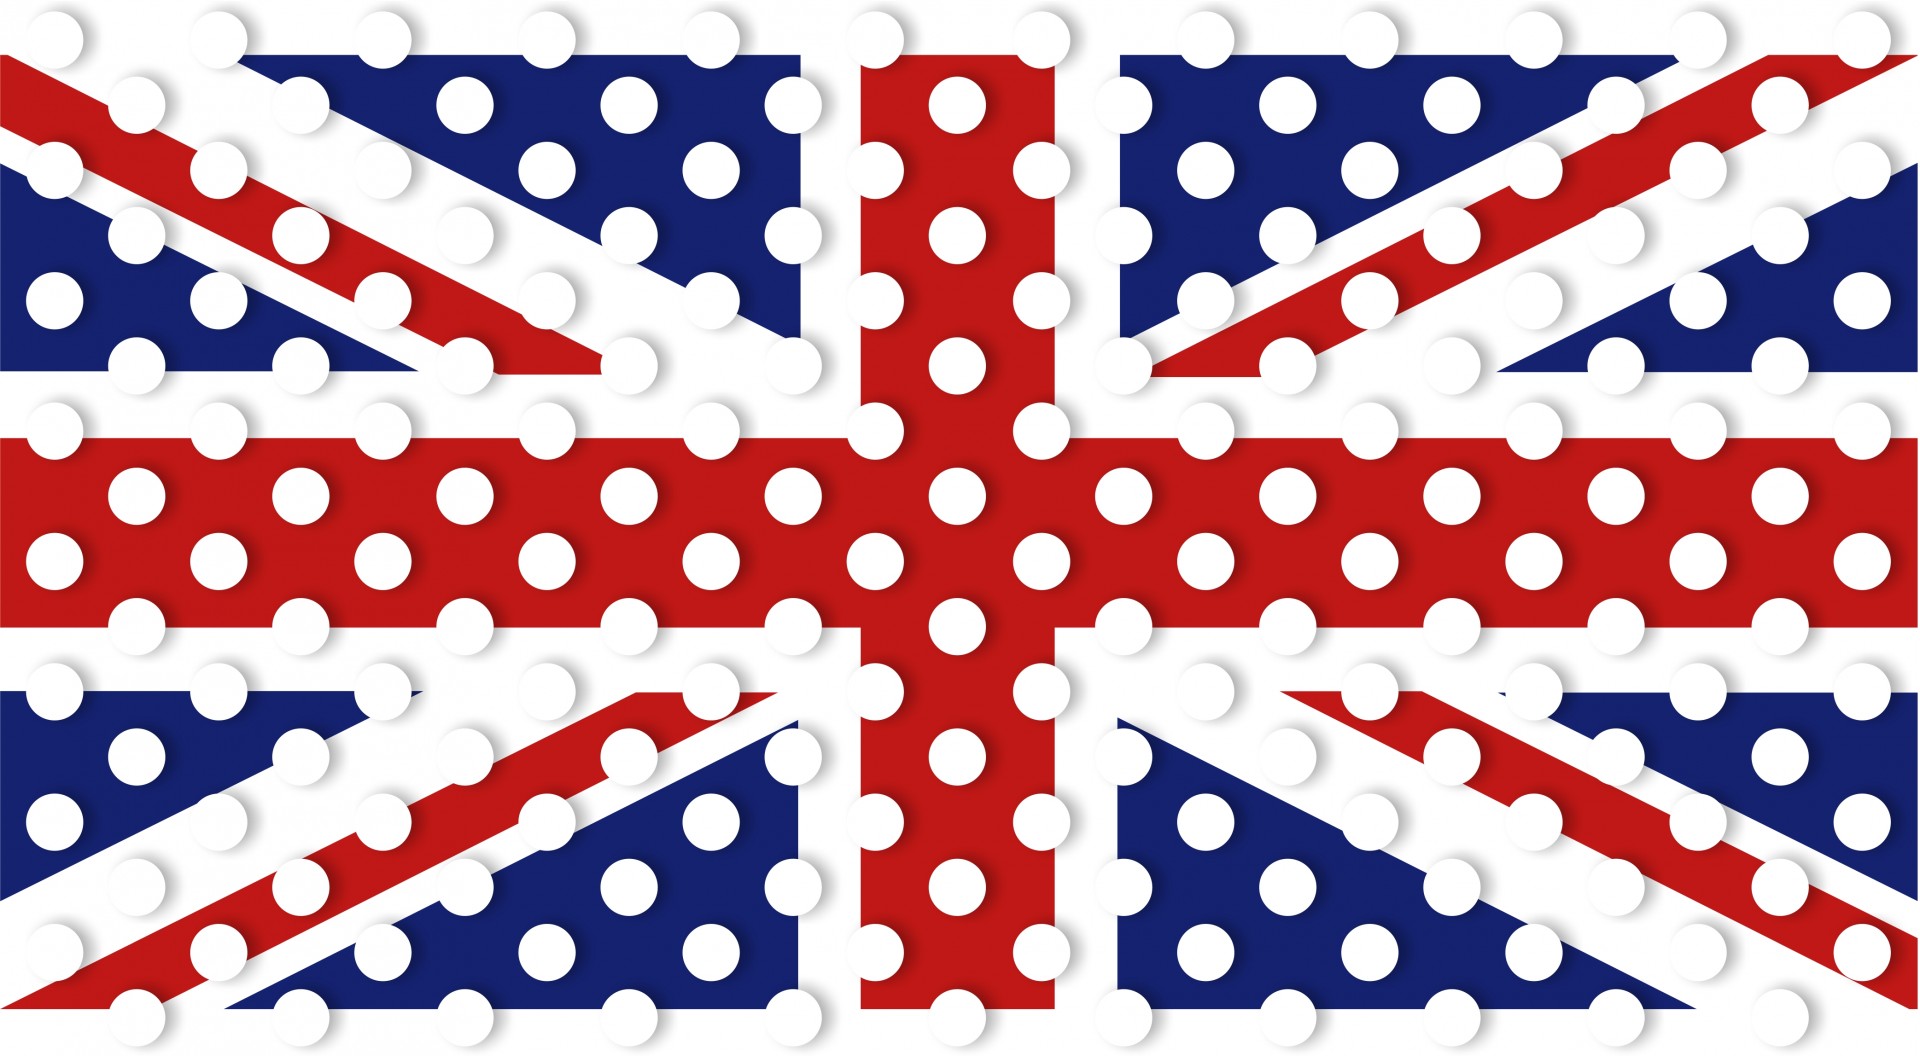 Illustration of the Union Jack of the United Kingdom with polka dots over the top.